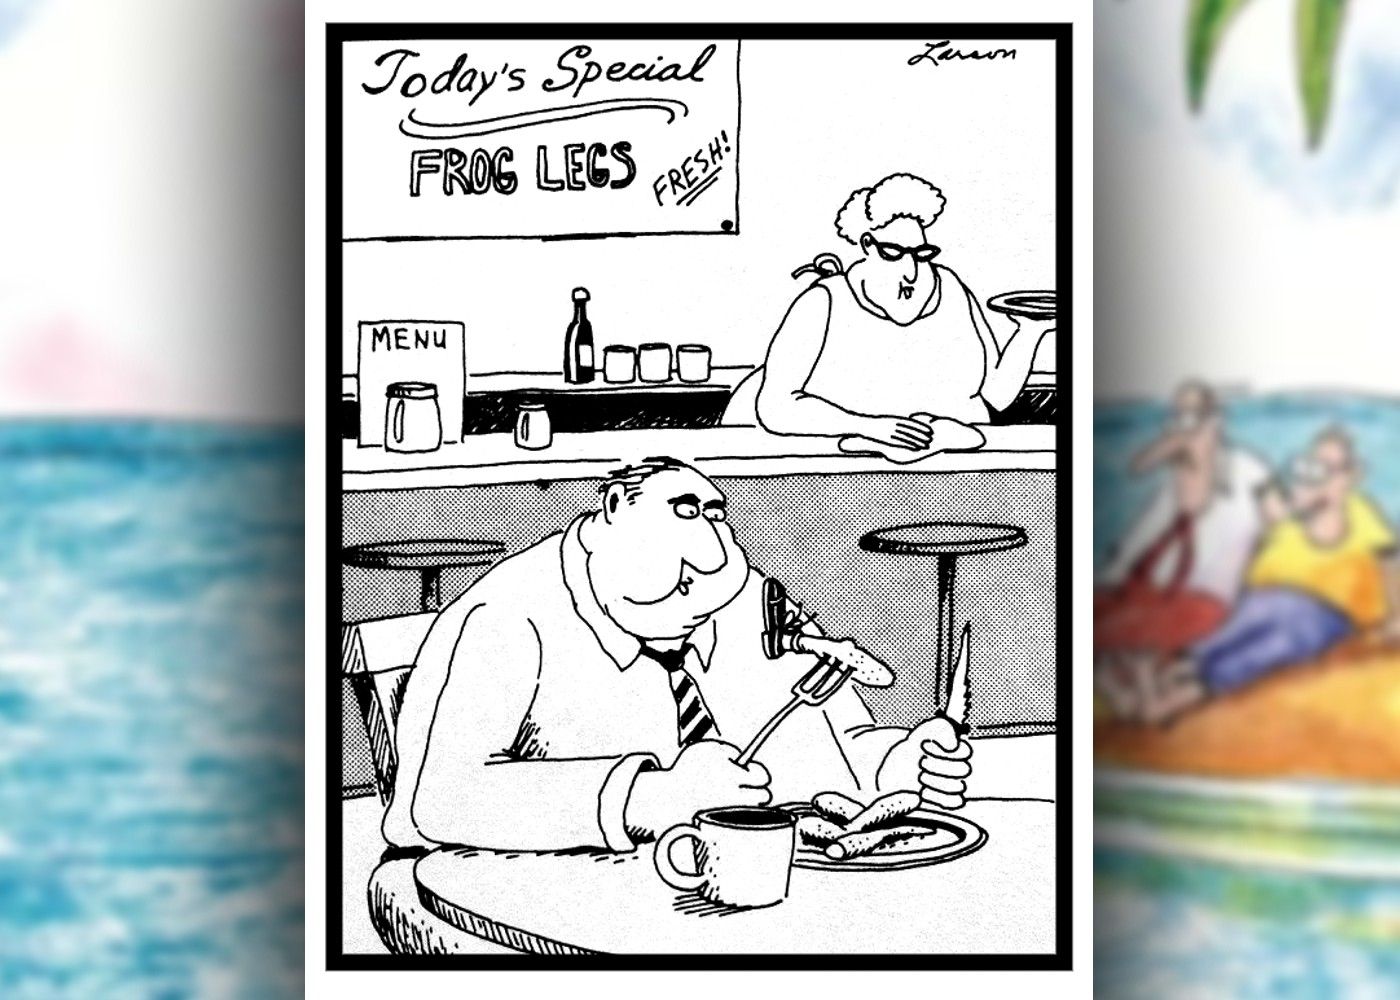 the far side comic where a man eats frogs legs, but ends up eating a tiny human leg